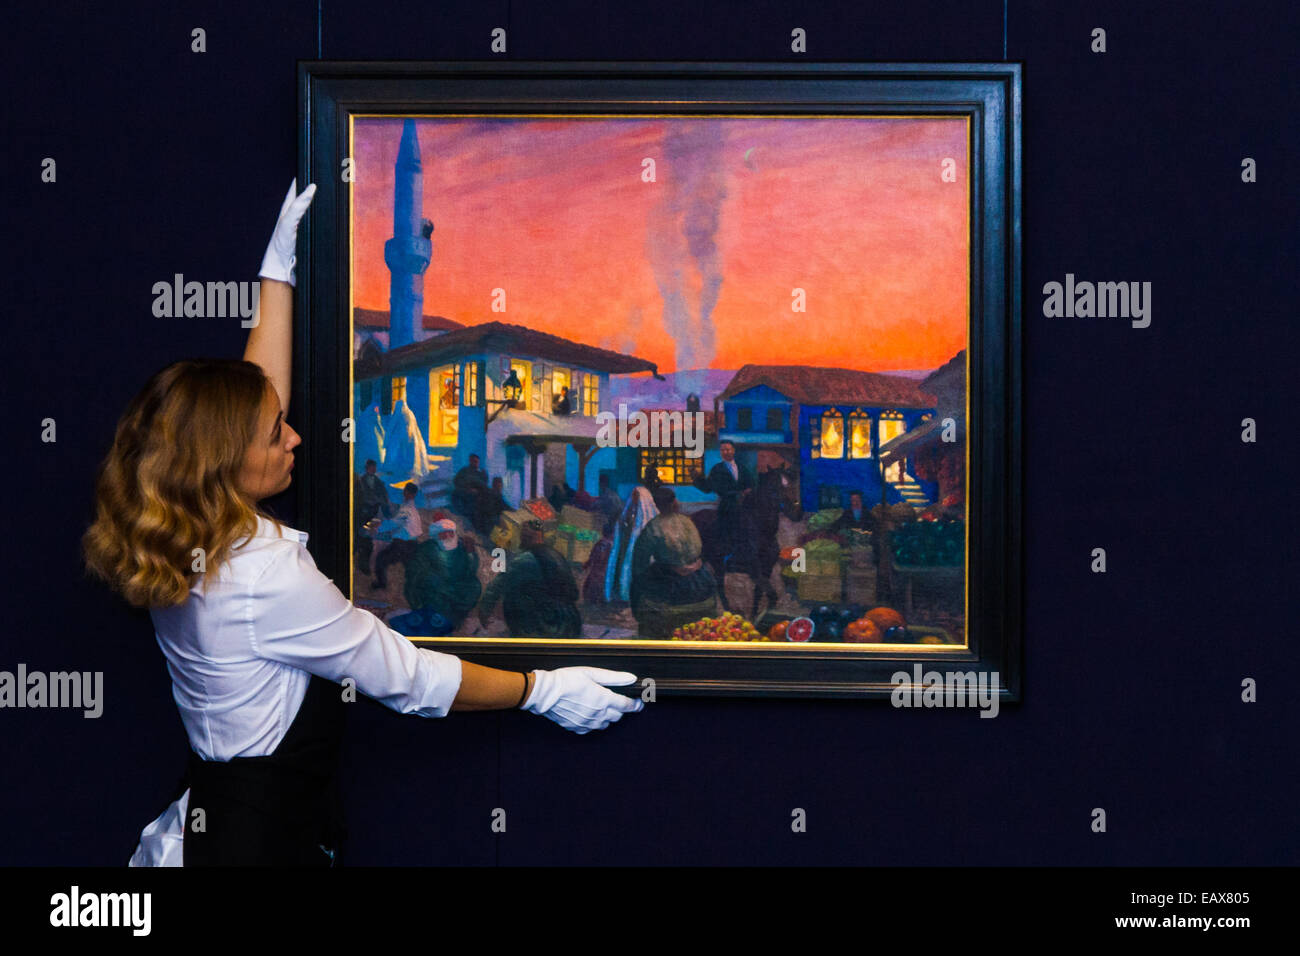 Sotheby's, London, November 21st 2014.  Sotheby's presents one of its strongest offerings of Russian paintings, icons and artworks as the renowned fine art  auction house celebrates its 25th year in Russia. Pictured: A sotheby's gallery technician straightens Boris Kustodiev's 'Bakhchisarai', and oil on canvas painting, described as the most impressive pre-revolutionary painting by Kustodiev to come to light in recent memory. It is expected to fetch between £1.2 and £1.8 million at auction. Credit:  Paul Davey/Alamy Live News Stock Photo